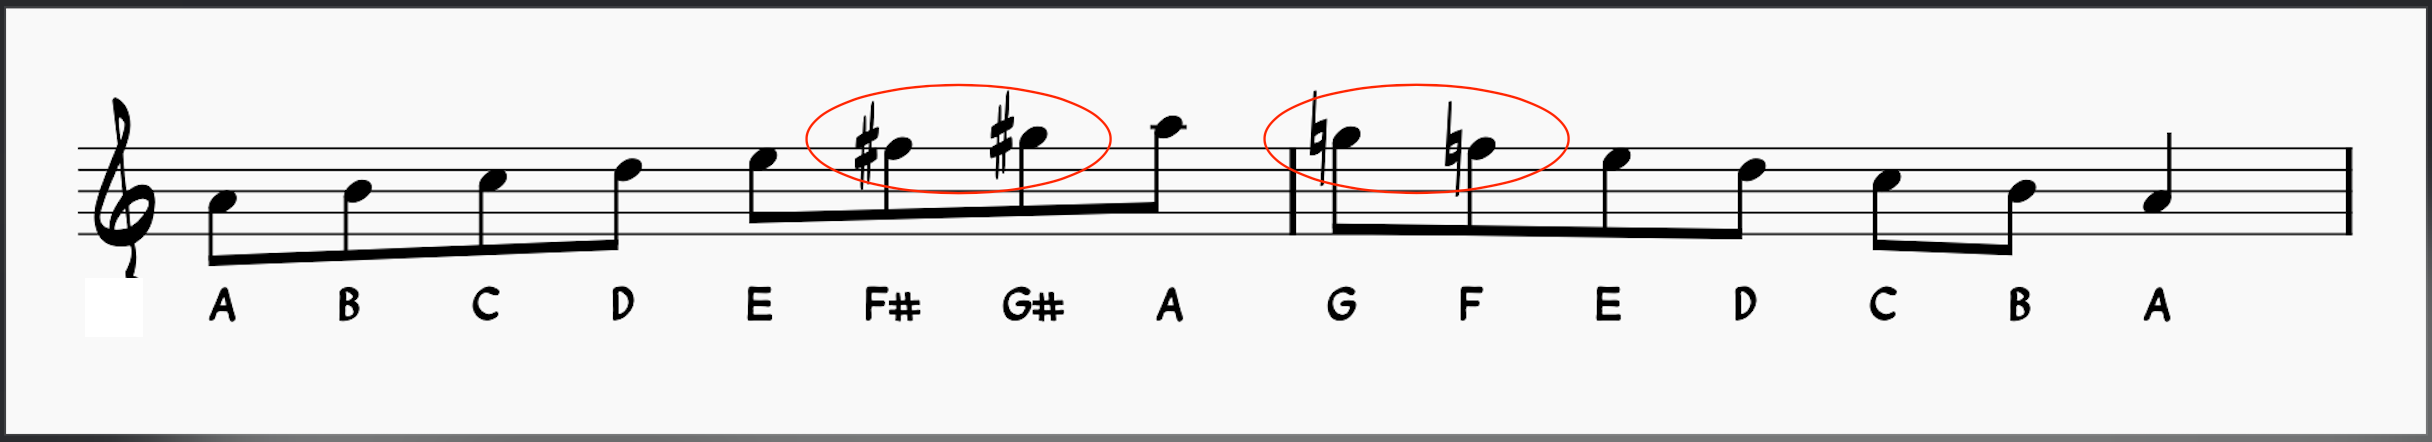 Ascending and Desceding Melodic Minor Forms